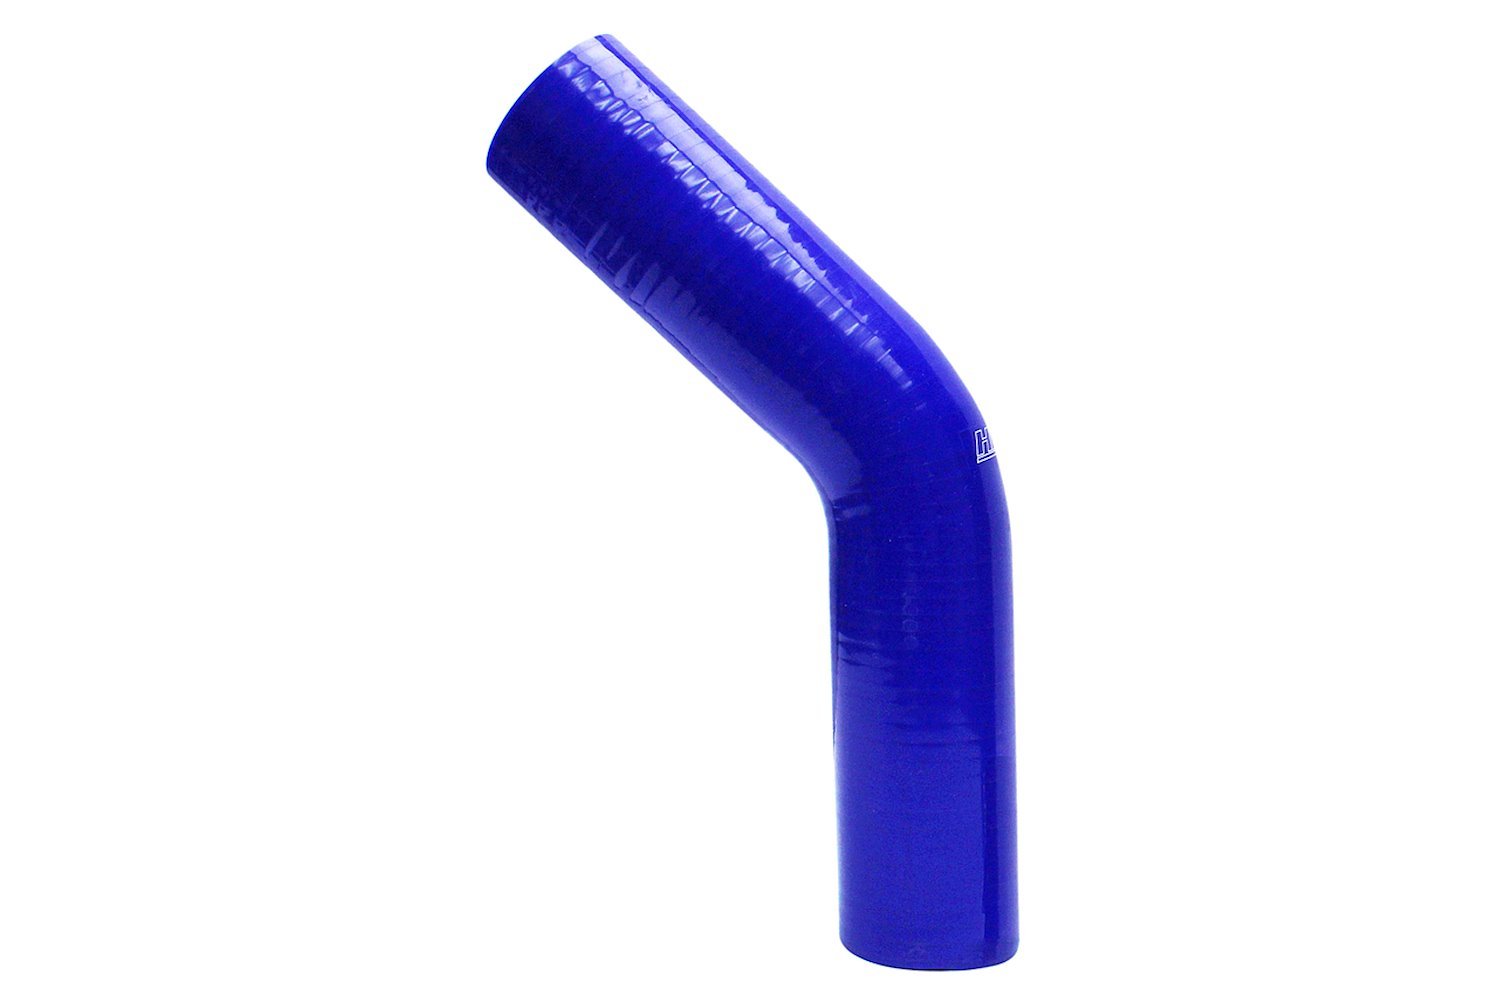 HTSEC45-225-BLUE Silicone 45-Degree Elbow Coupler Hose, High-Temp 4-Ply Reinforced, 2-1/4 in. ID, Blue